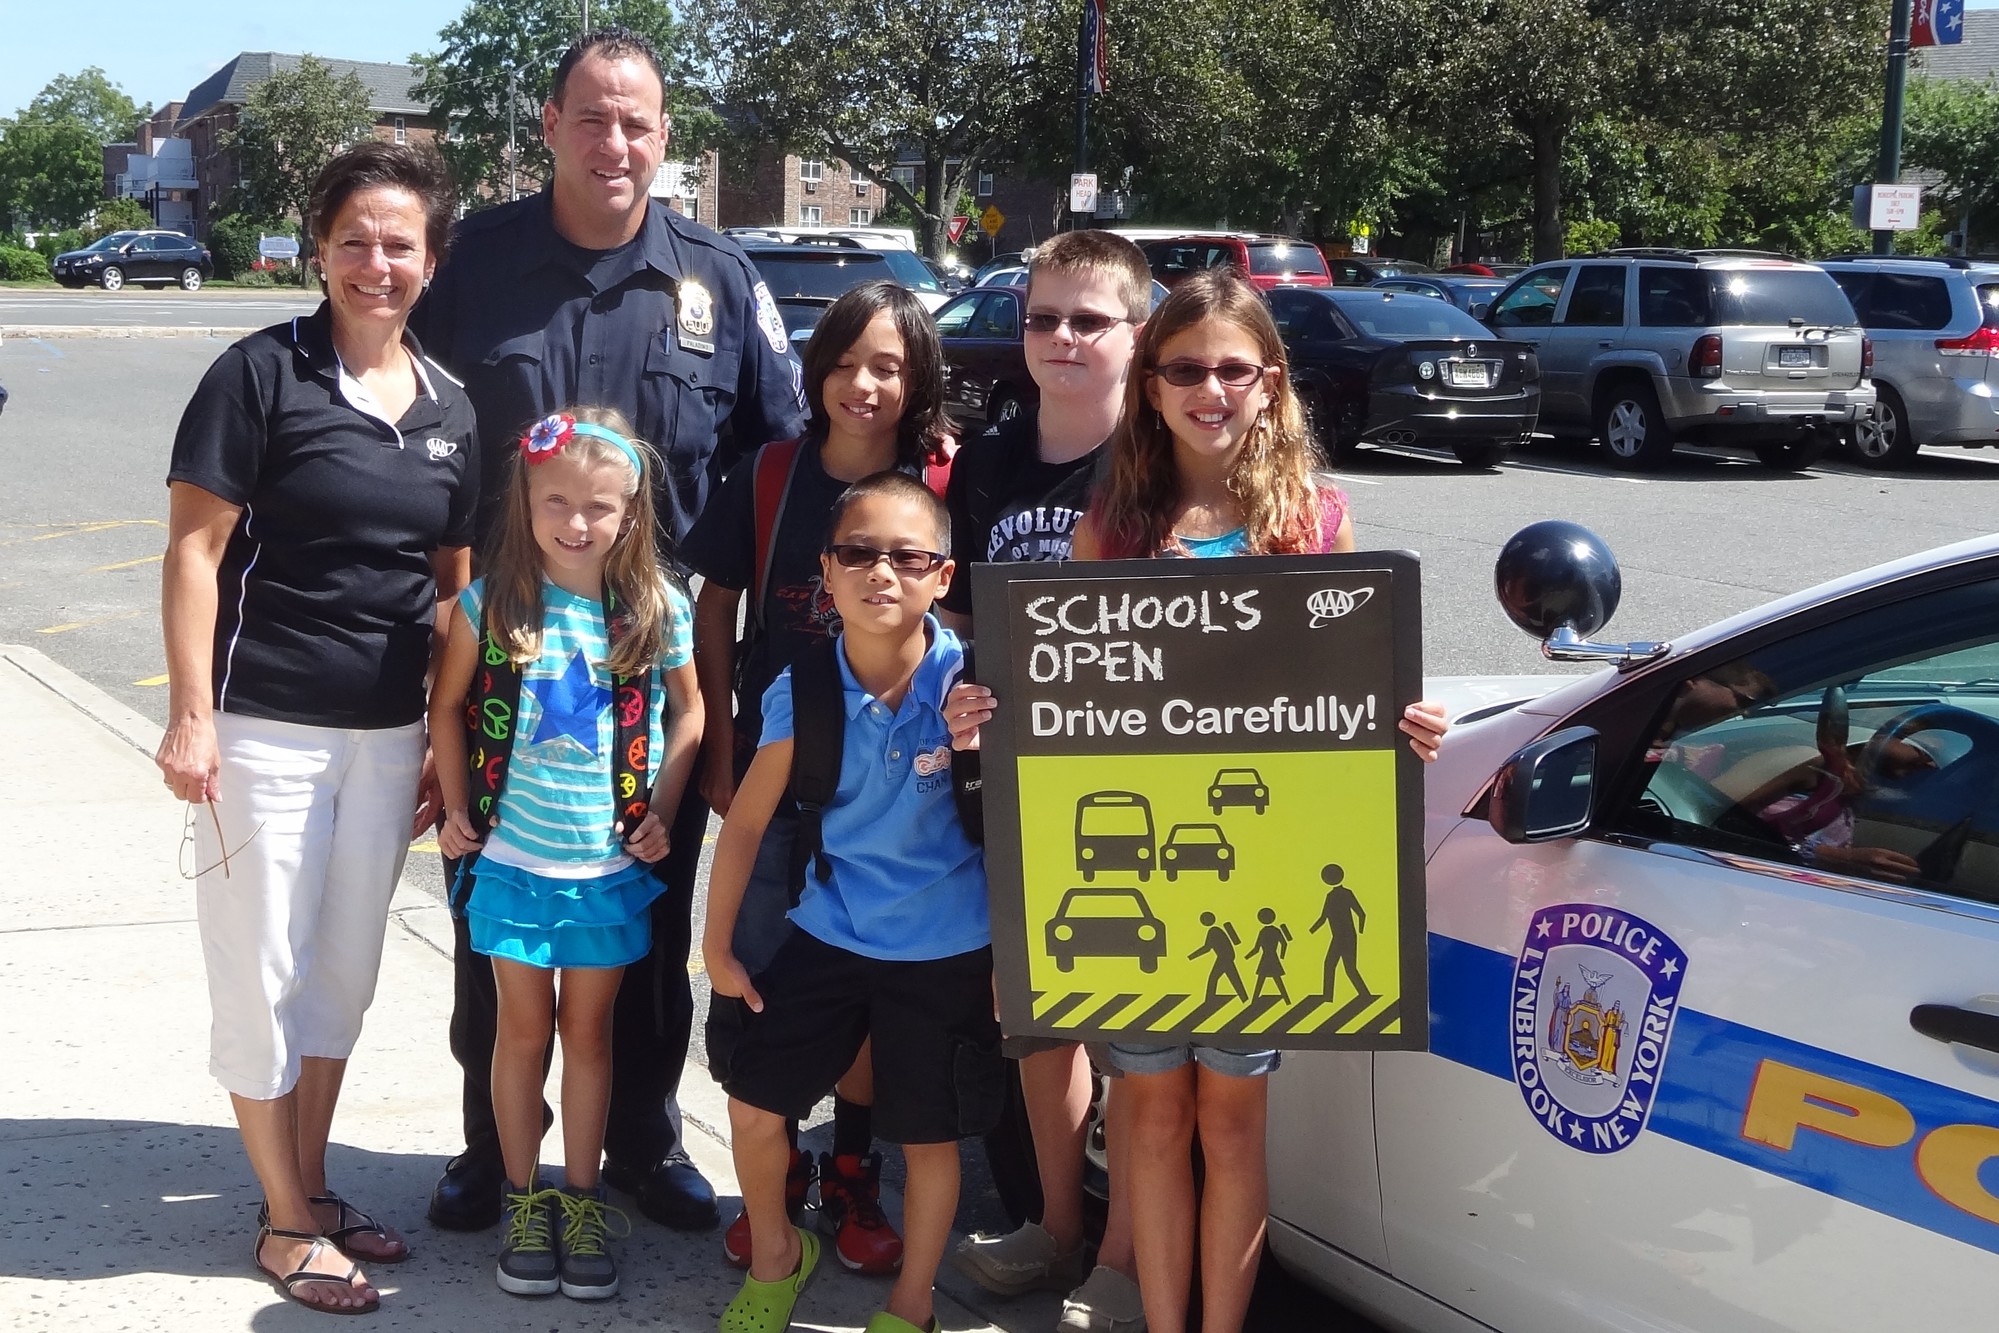 Sergeant Brian Paladino of the Lynbrook Police Department, along with AAA’s Traffic Safety Specialist Karen Blackburn, left, helped to launch AAA’s “School’s Open — Drive Carefully” campaign at police headquarters in Lynbrook. Also pictured were students Marisa Parco, Jimmy Pardo, Chris Paladino, Nicholas Paladino and Emmie Paladino.